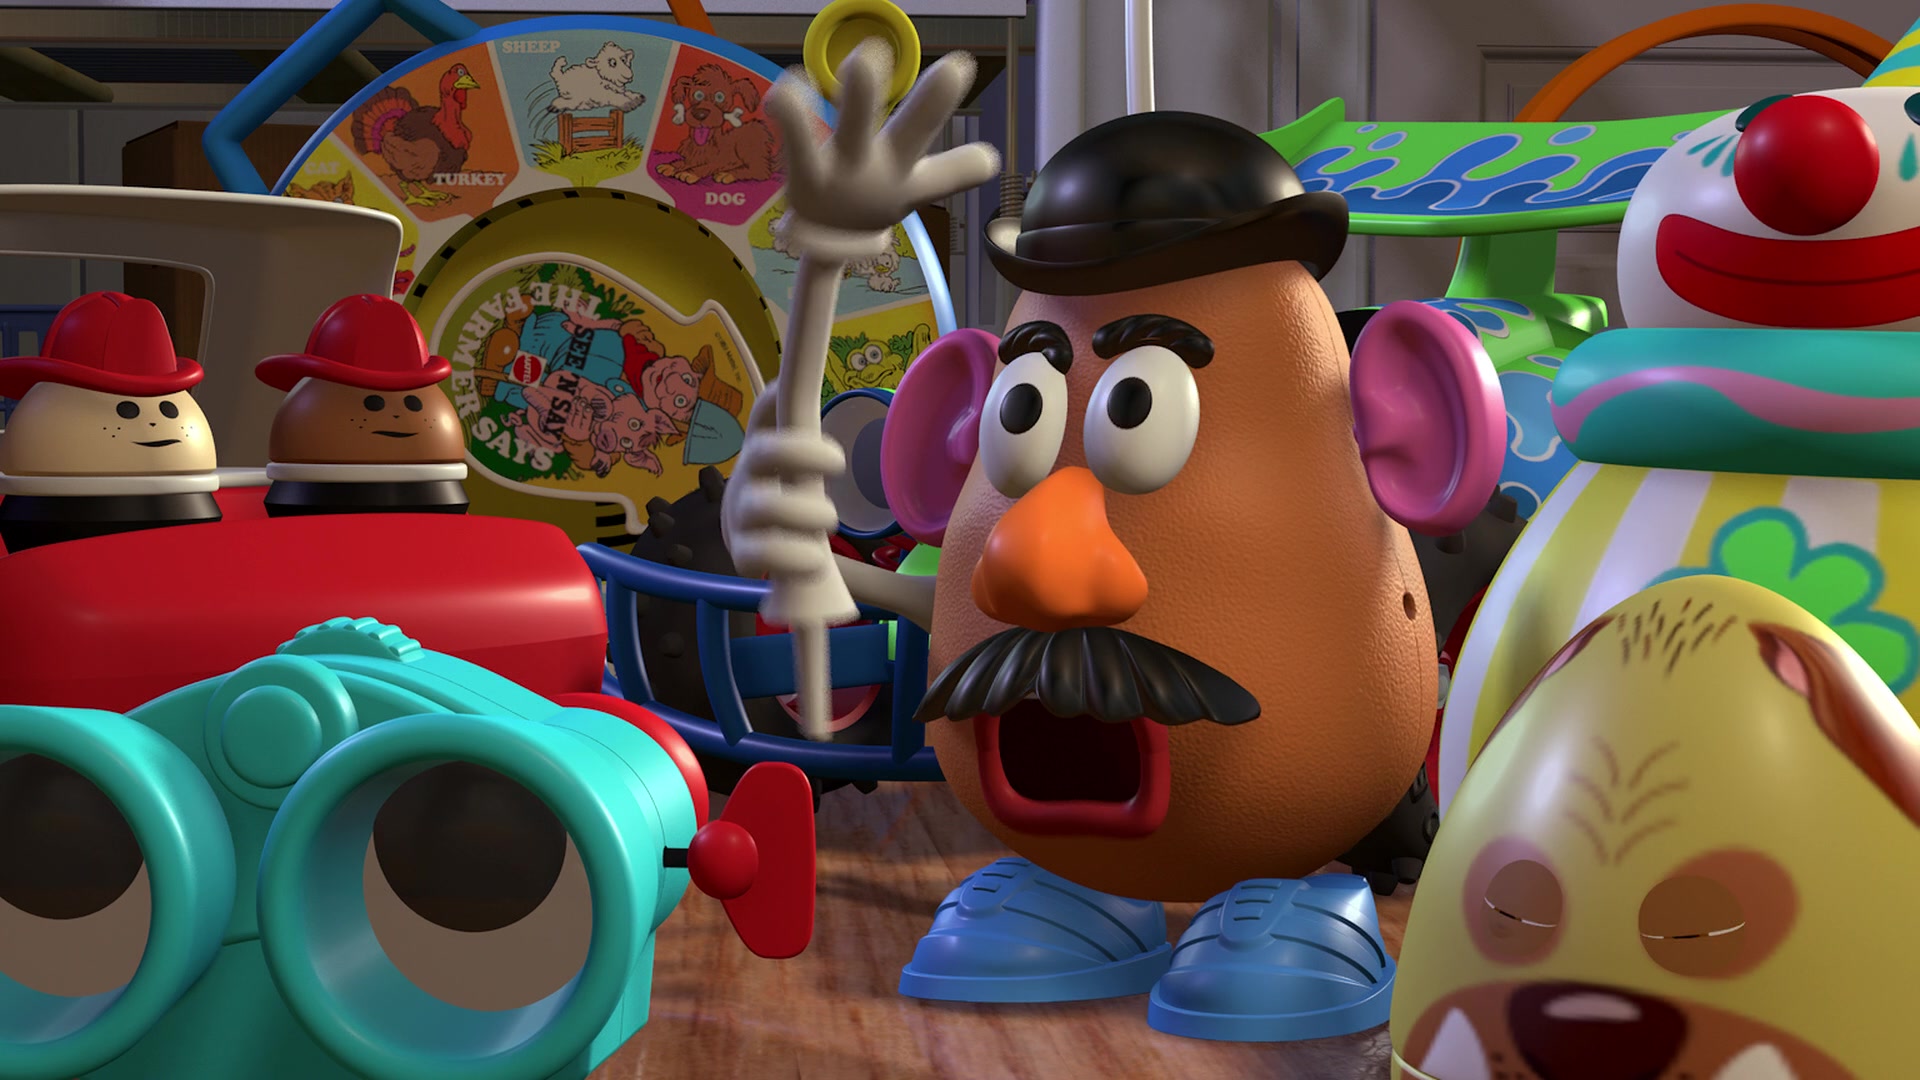 Mr. Potato Head (Toy Story)  Evolution In Movies & TV (1995 - 2021) 